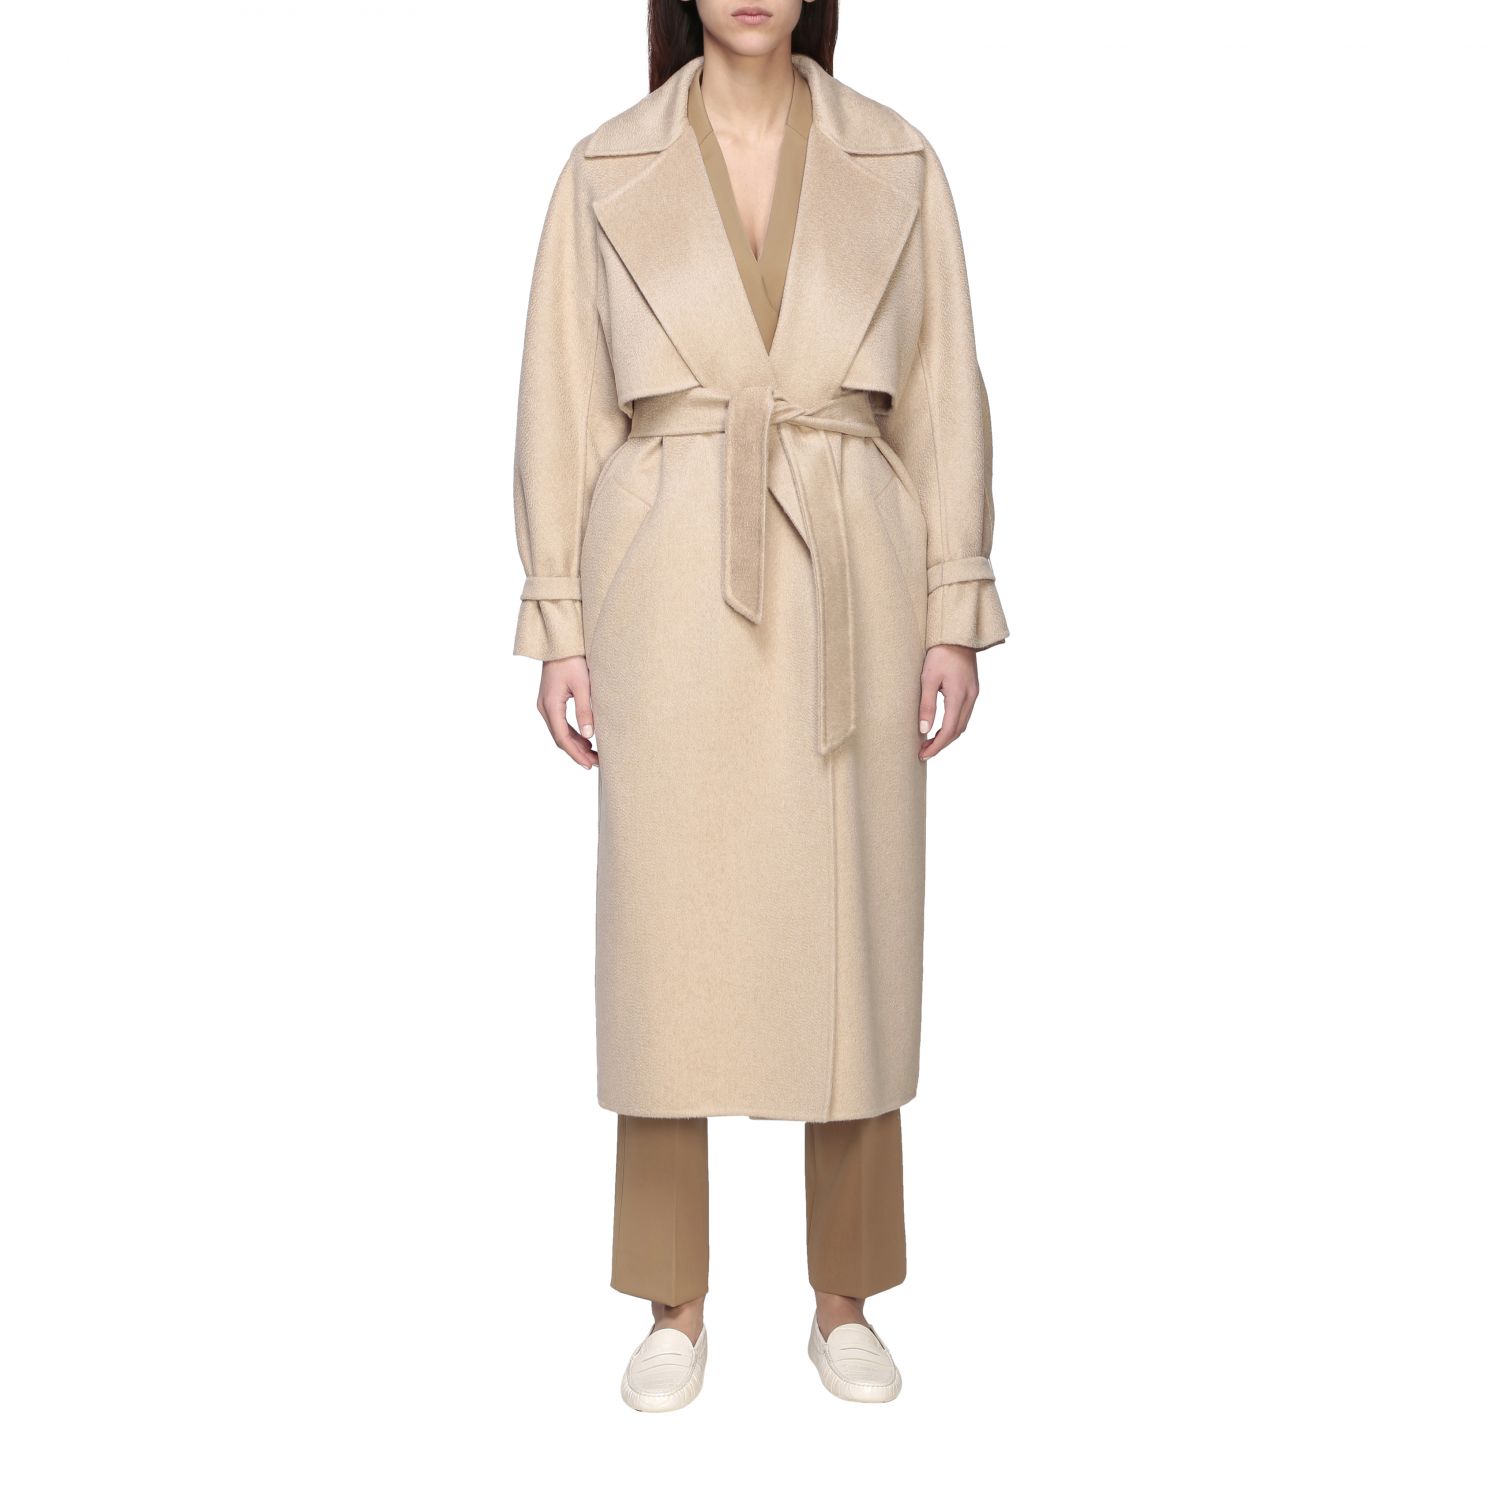 Max Mara Outlet: Agar 2 piece trench coat with vest and bolero | Coat ...